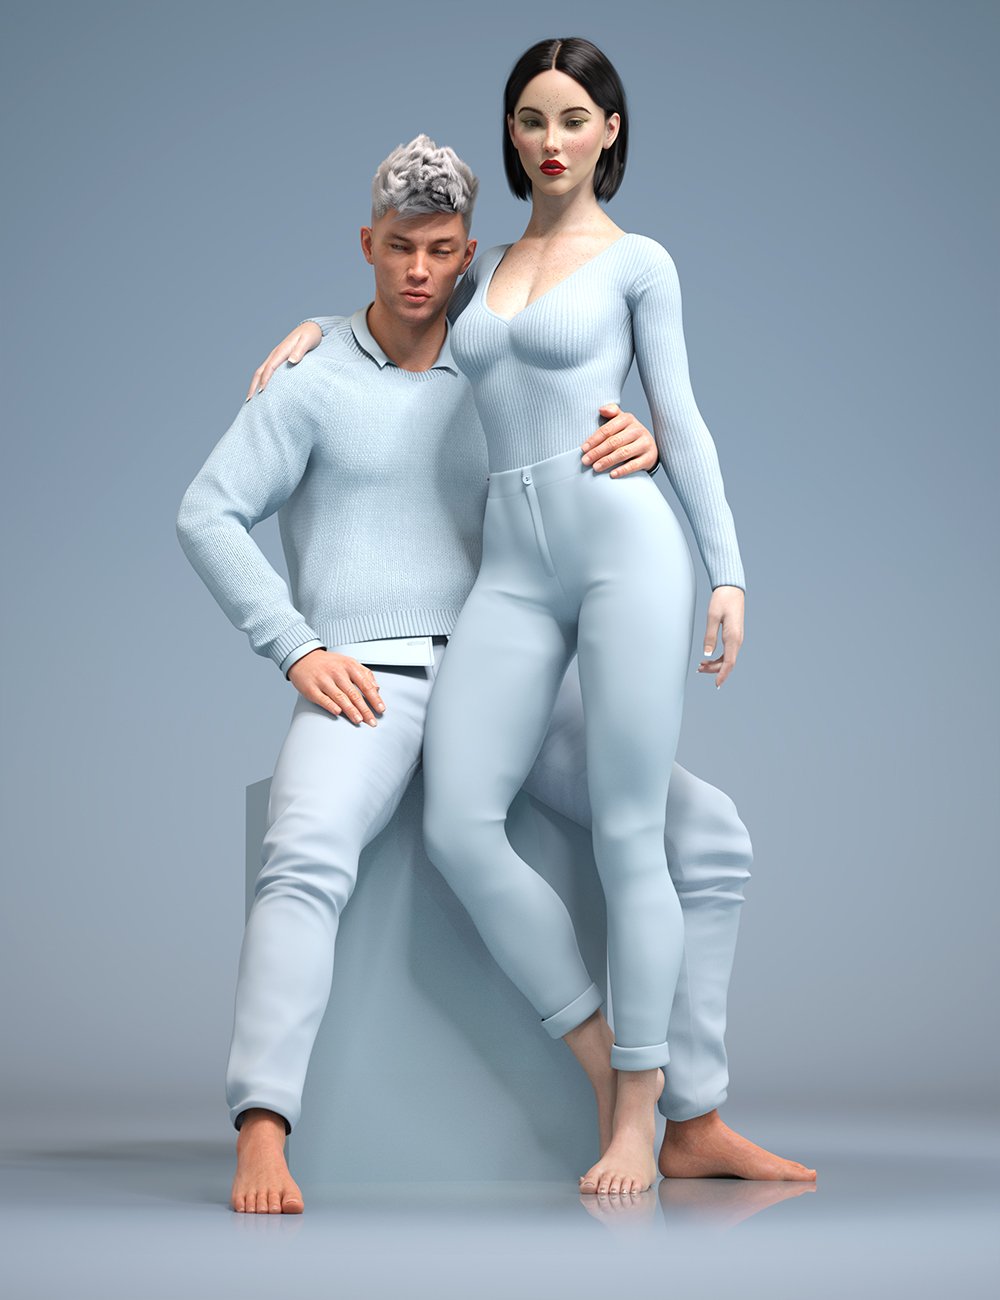 Lookbook for Two Poses and Expressions for Genesis 8.1 Male and Female by: 3D Sugar, 3D Models by Daz 3D